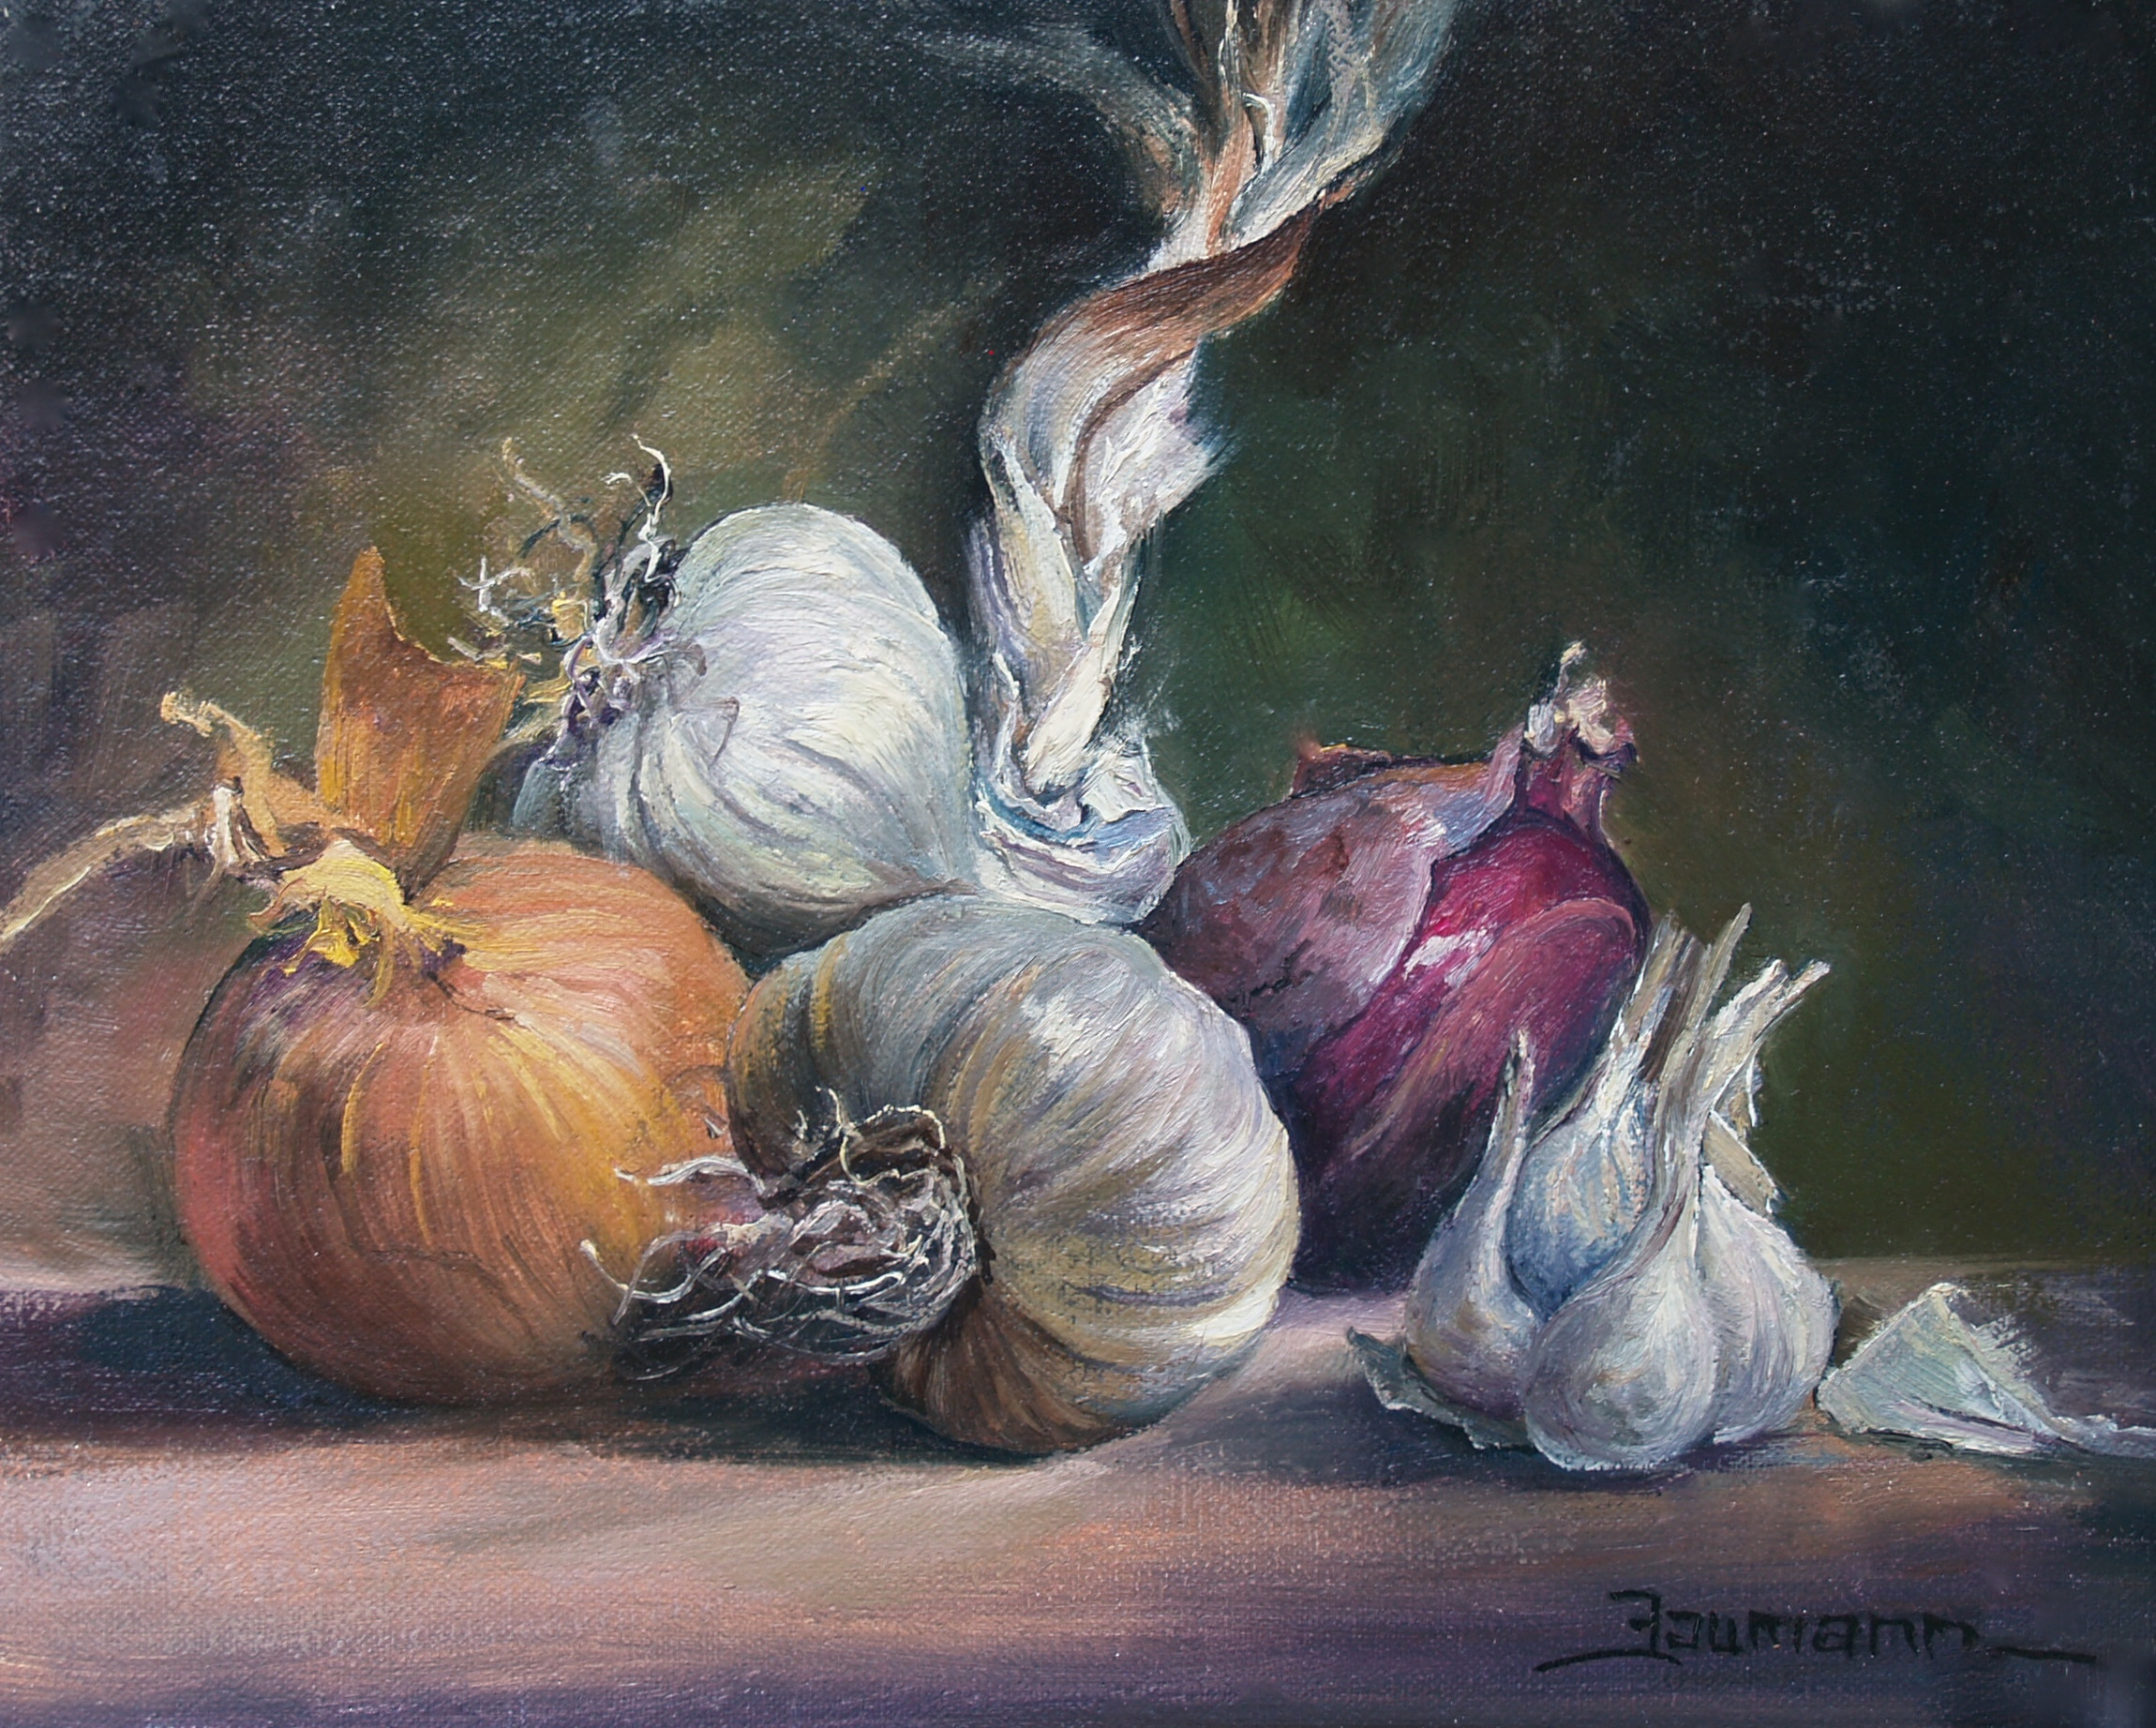 This is a still life painting by Stefan Baumann of yellow and purple onions and white garlic cloves.